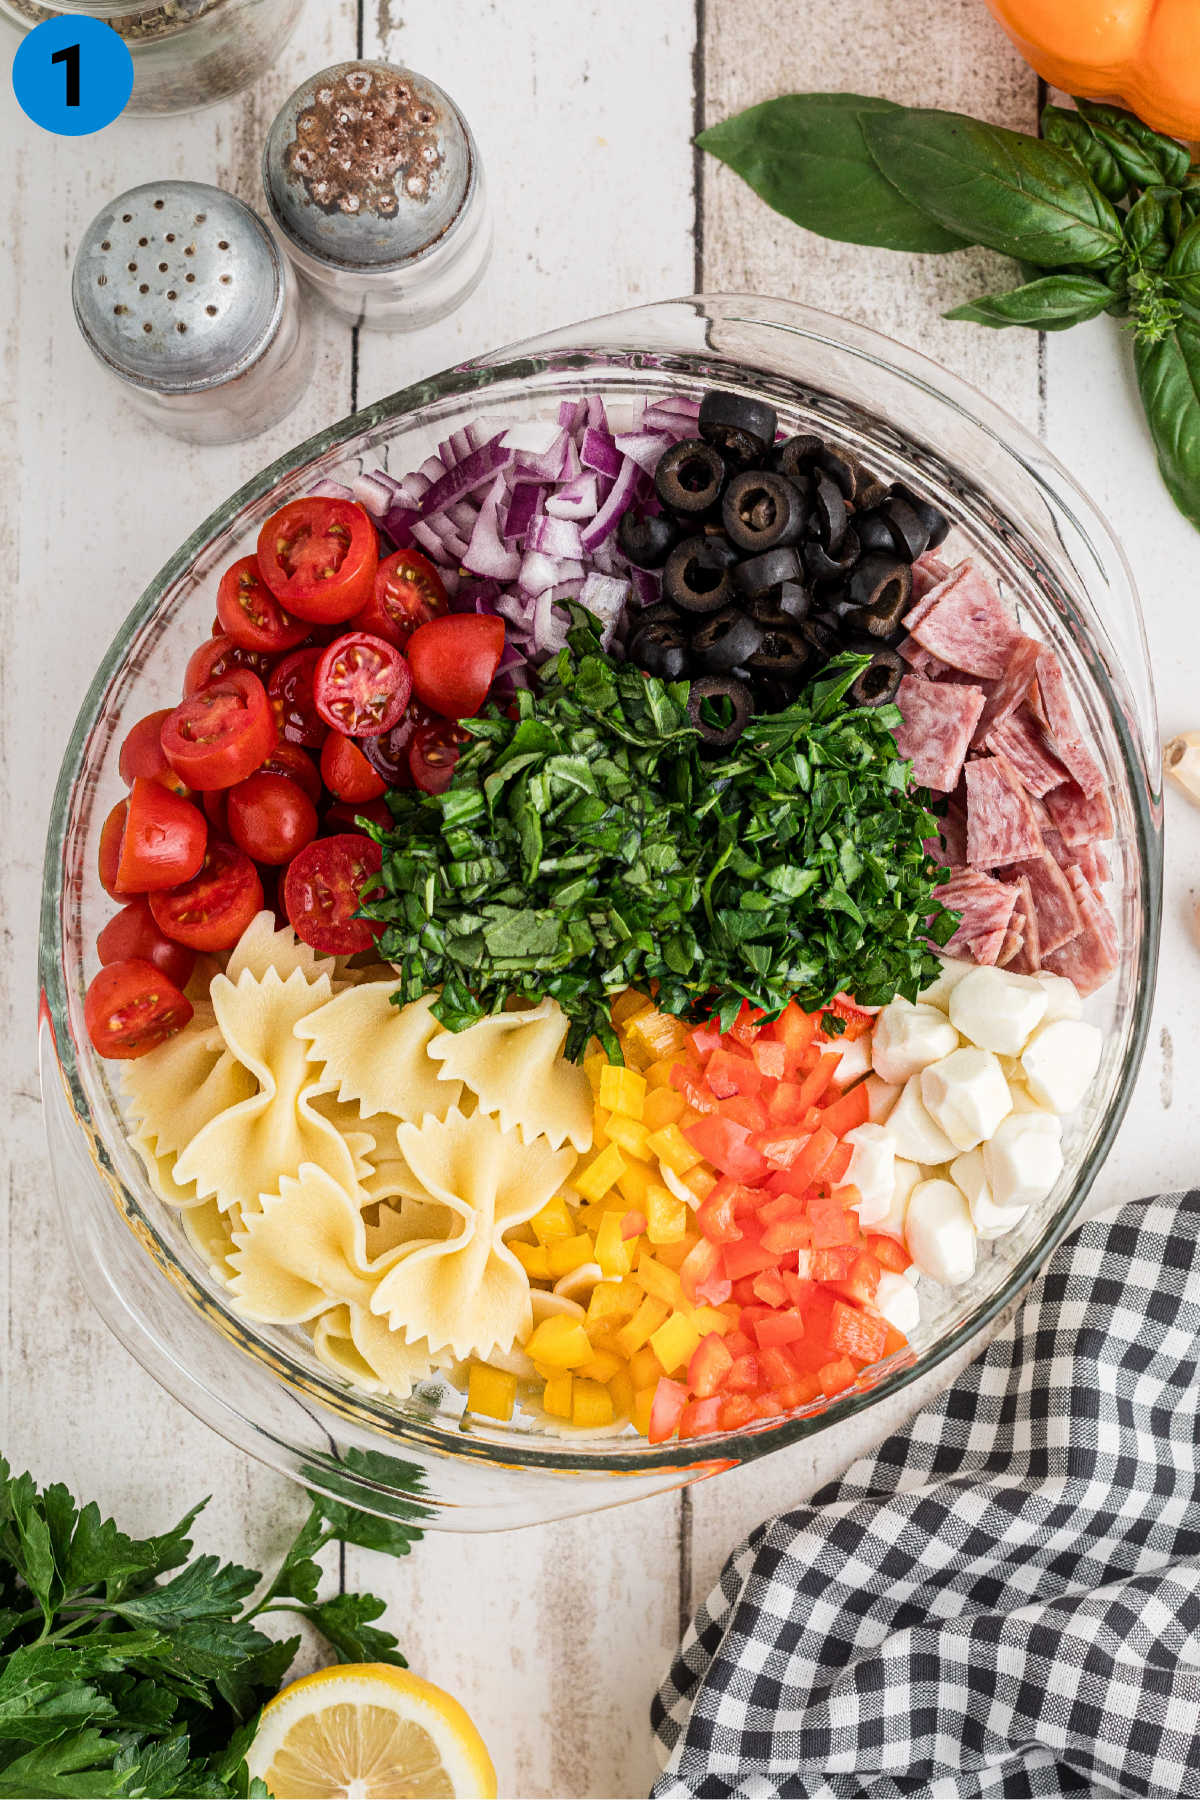 A large salad bowl filled with ingredients needed to make an Italian Pasta Salad.